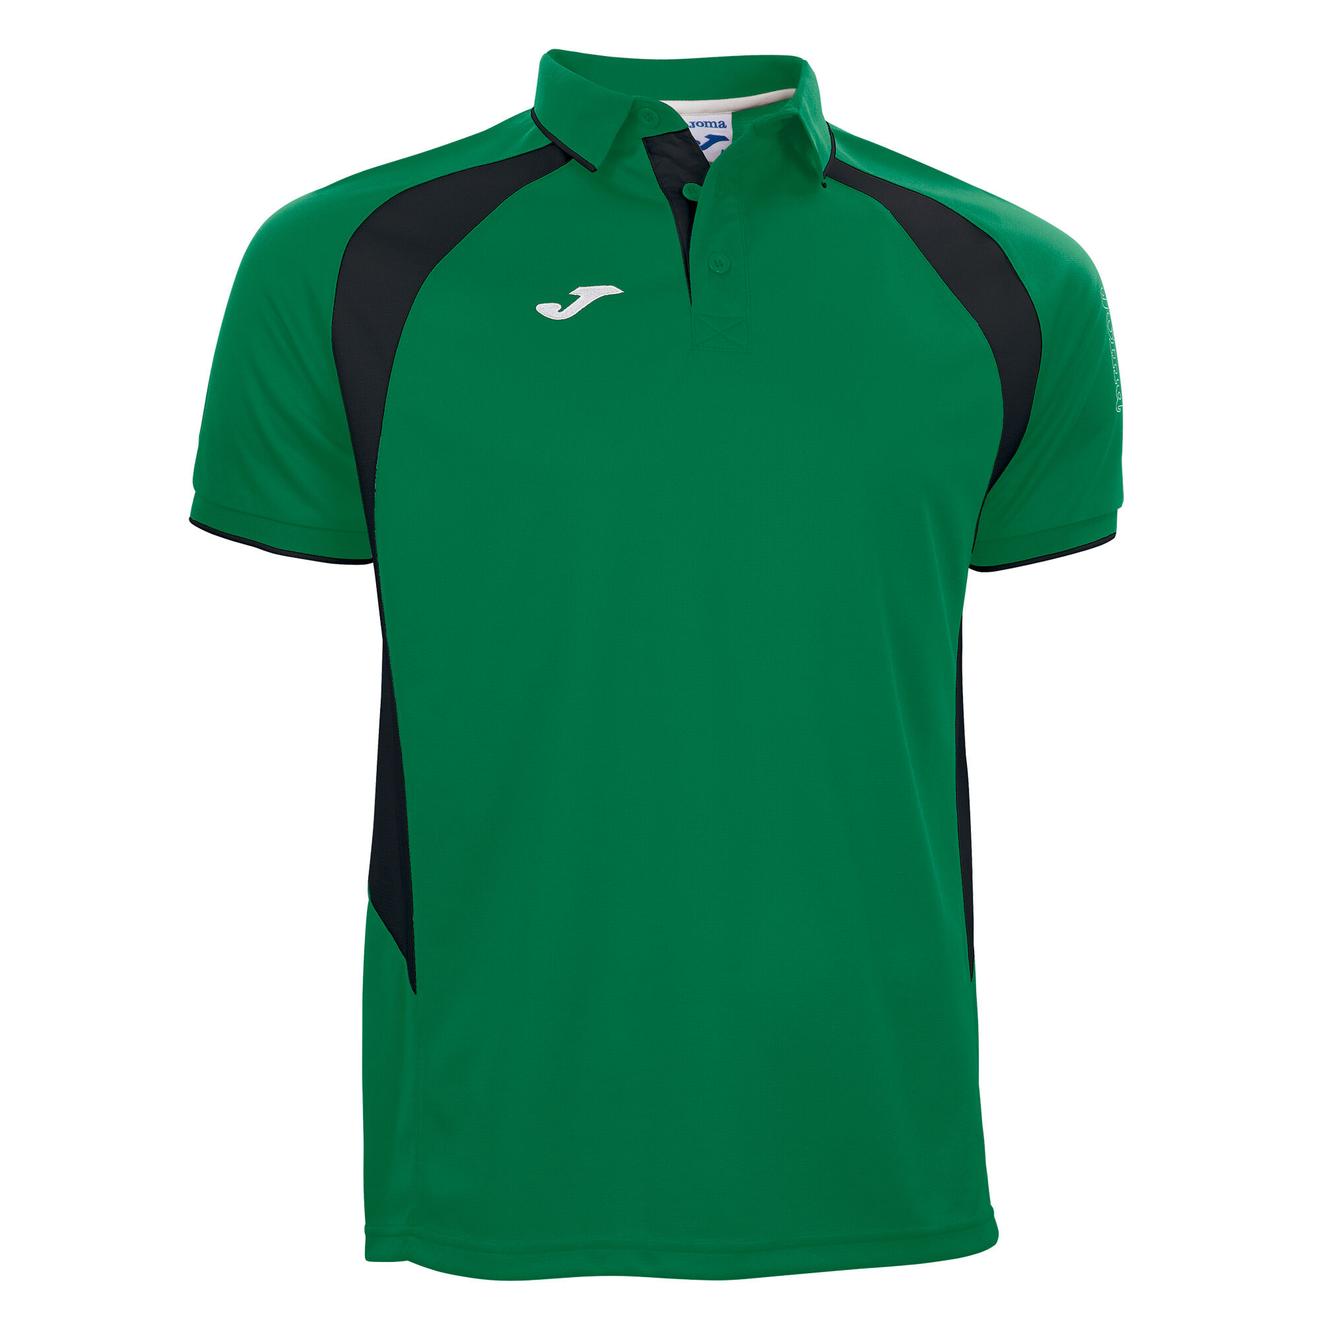 Polo shirt short-sleeve man Championship III green black offers at £10.5 in Joma